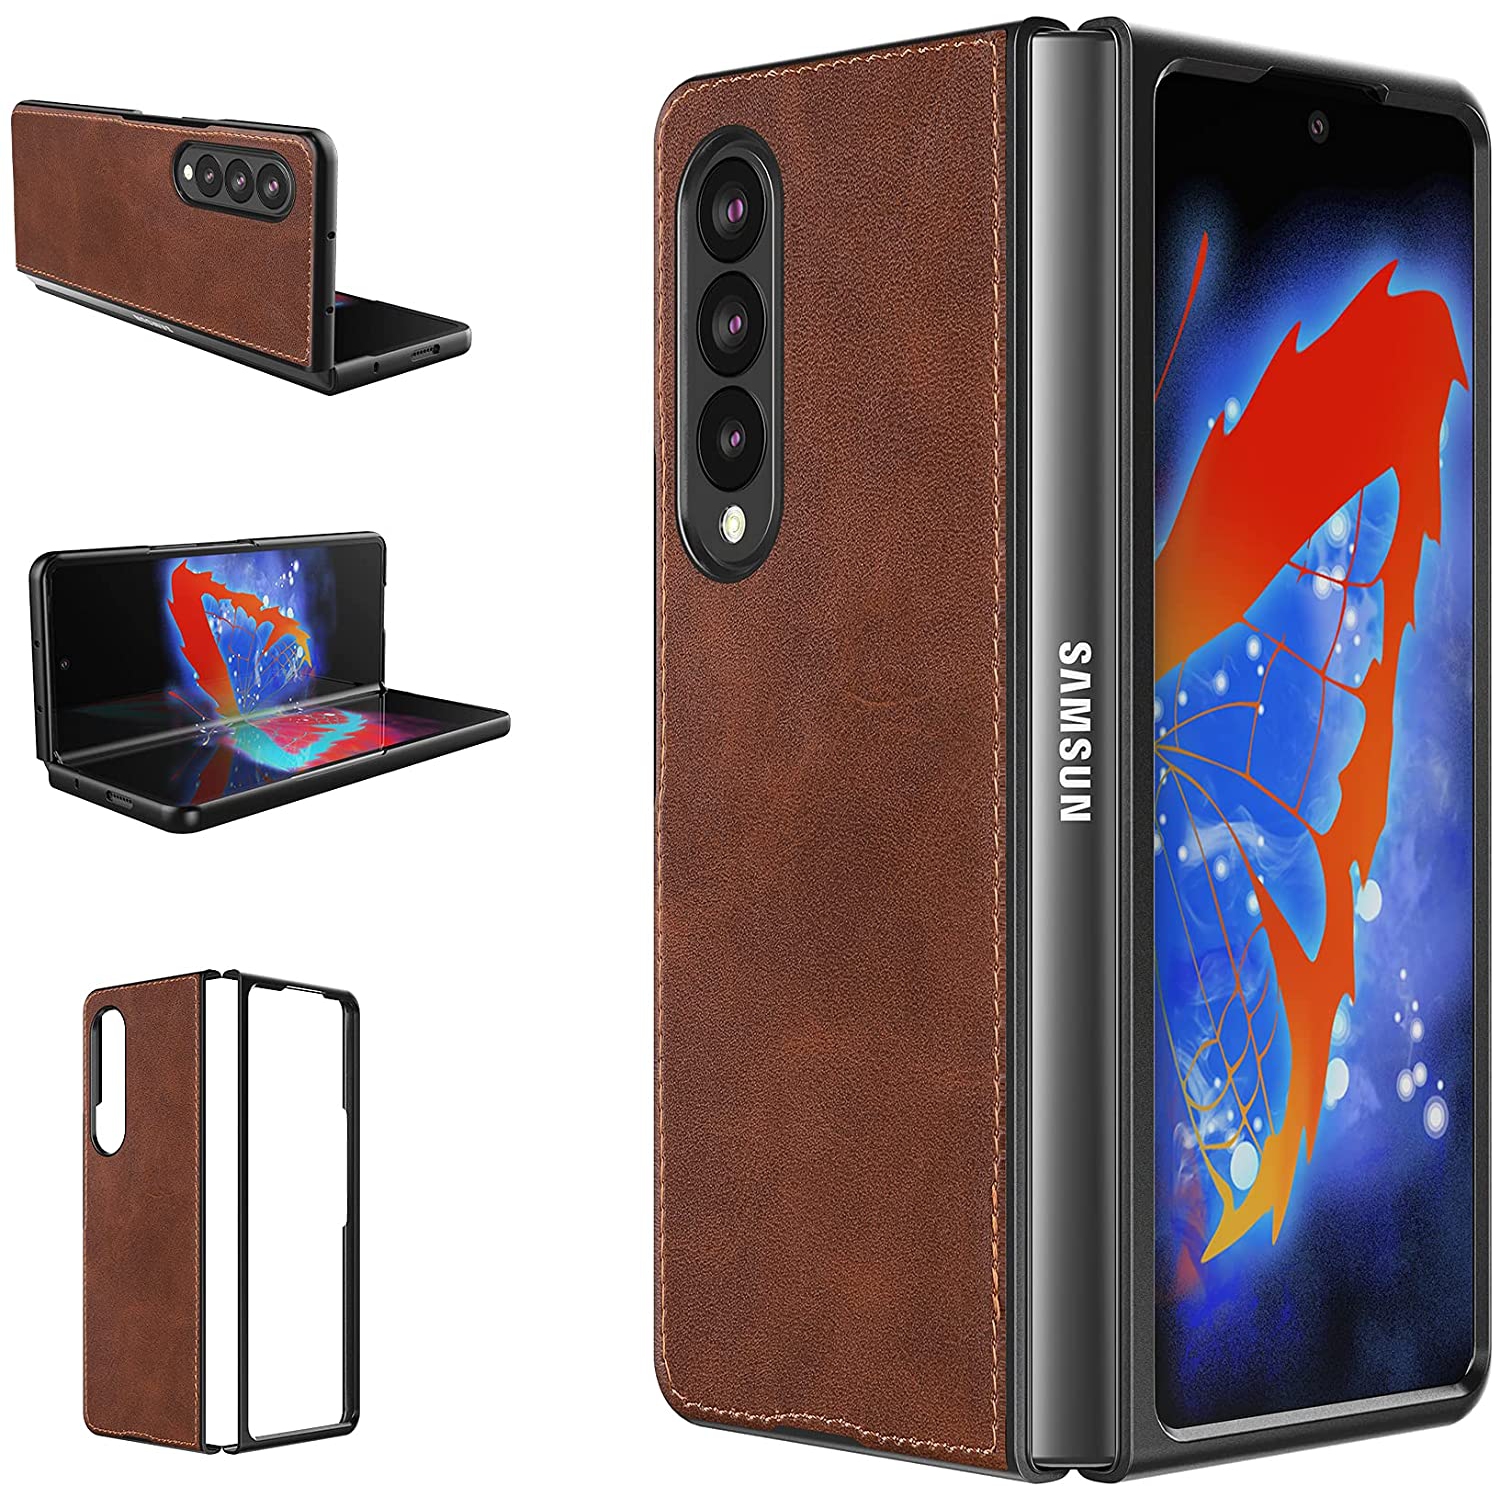 【CSmart】 Slim Fitted Shockproof Hard PC Shell Leather Flip Case Cover for Samsung Galaxy Z Fold 3 5G, Brown